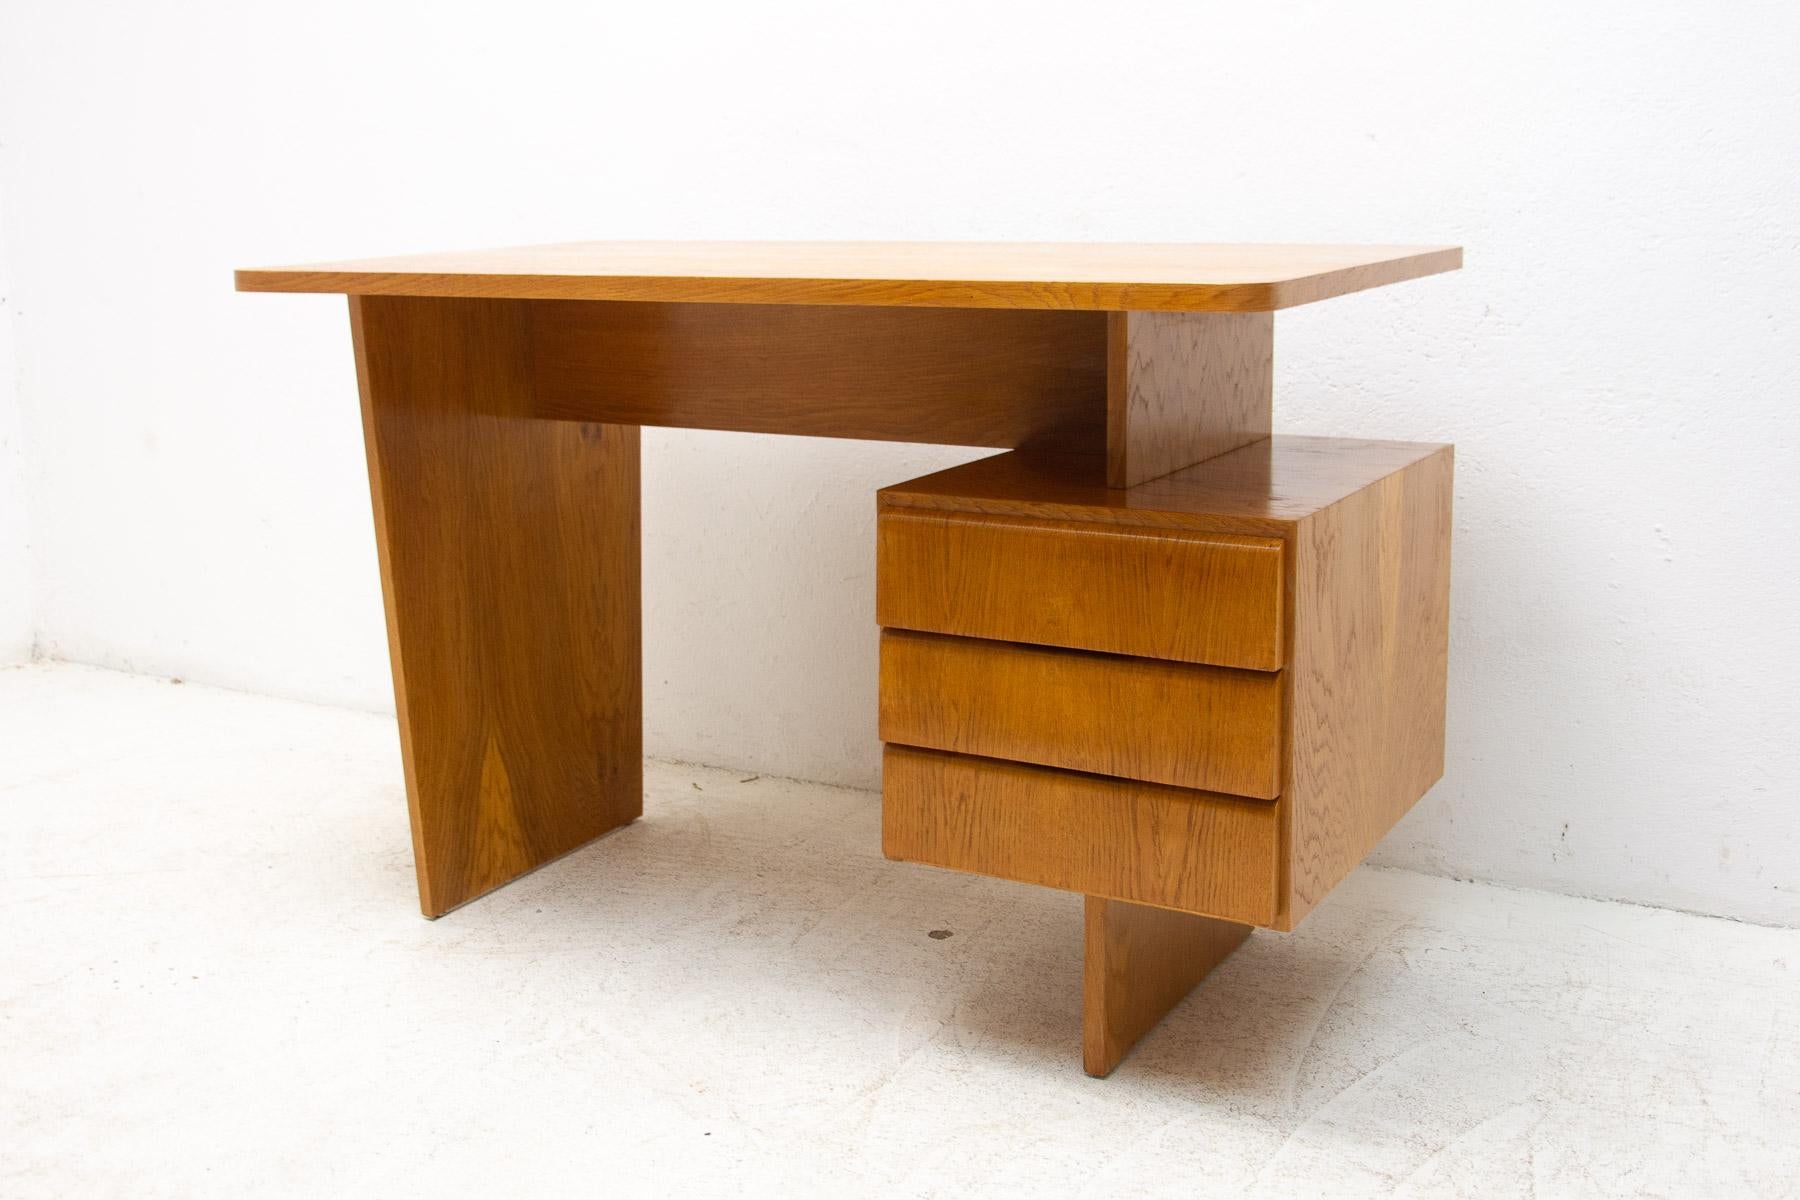 This desk was designed by Bohumil Landsman in 1970s for Jitona company. The design is very simple and elegant. It features a section with 3 drawers. It´s made of beech wood.

The piece is fully restored and in excellent condition.

Height: 65